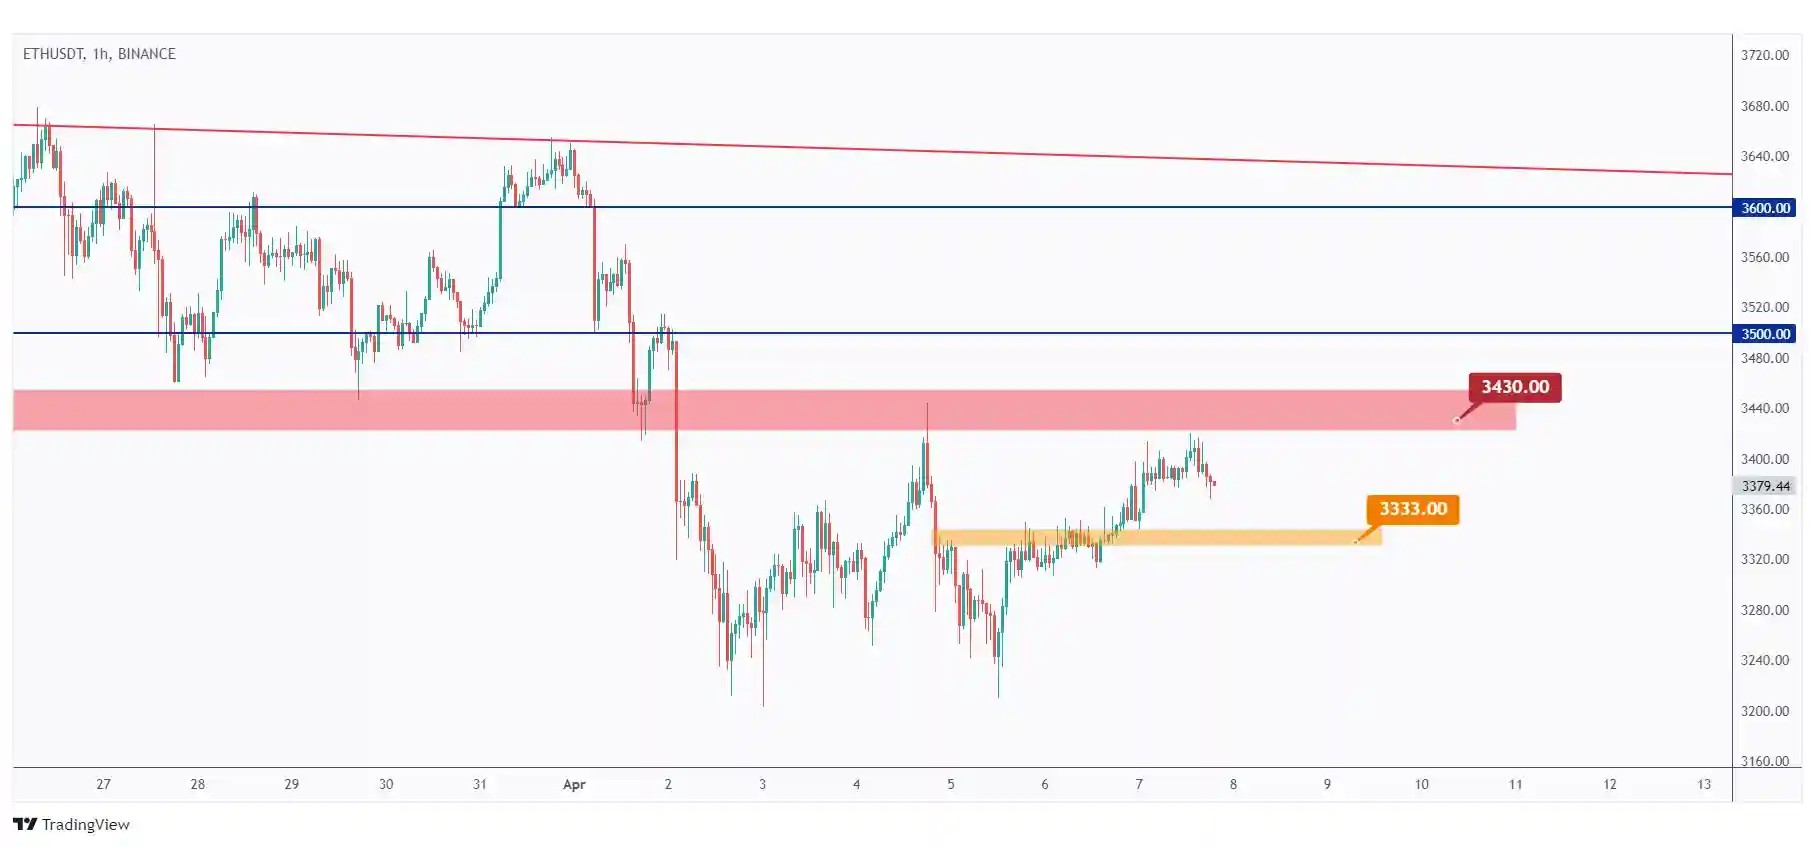 ETH 1H chart showing the last low in orange at $3333 that we need a break below for the bears to take over.